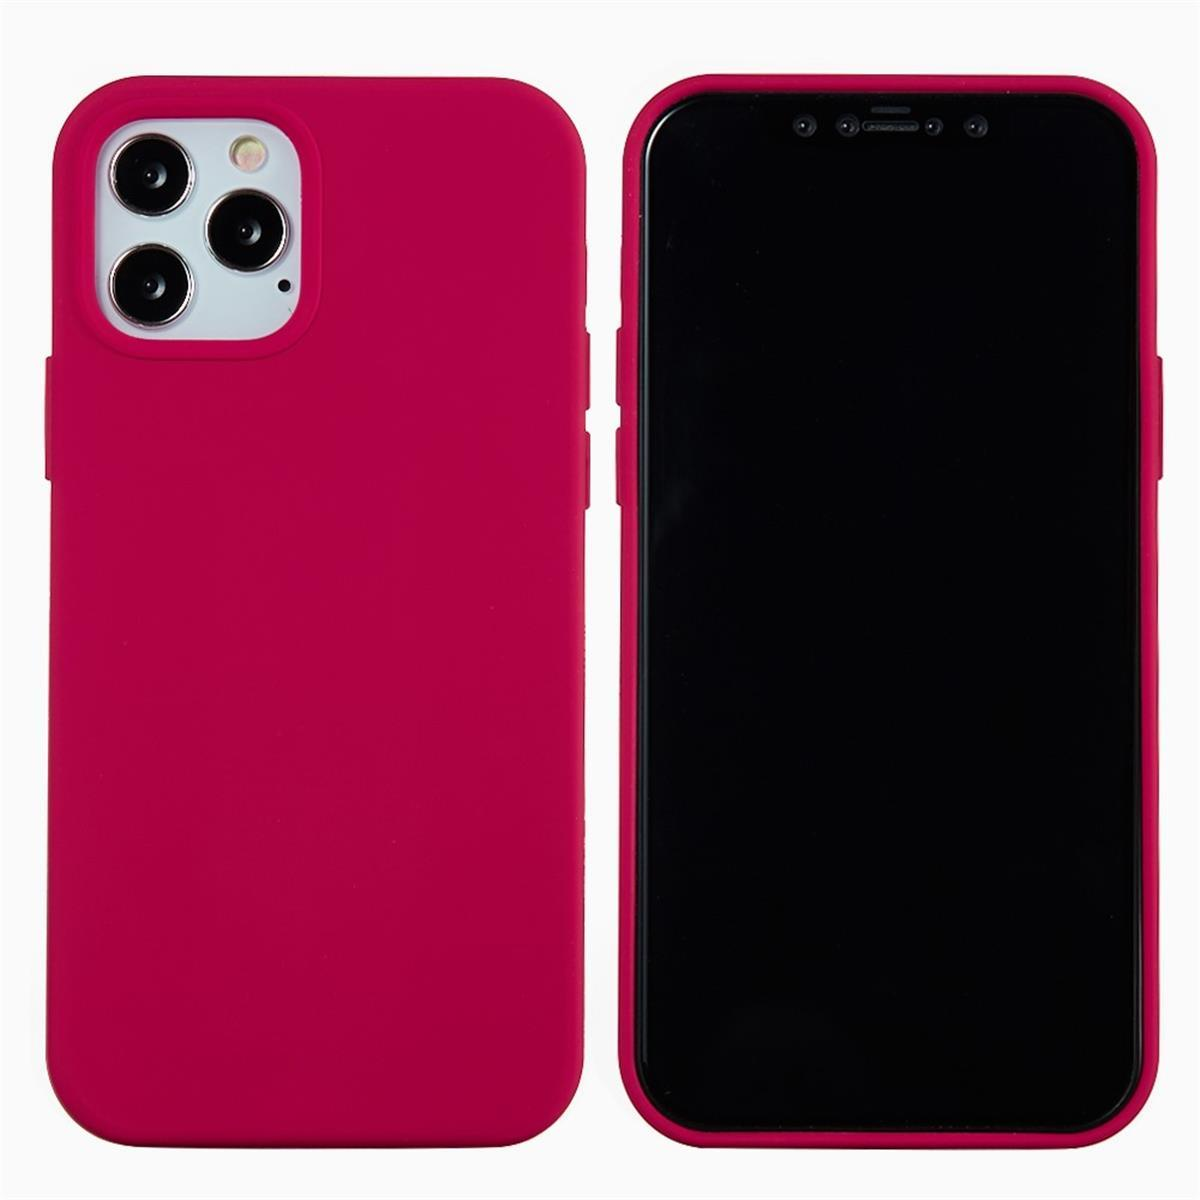 COVERKINGZ Handycase aus Silikon, Rot Zoll], [6,7 13 iPhone Apple, Pro Max Backcover